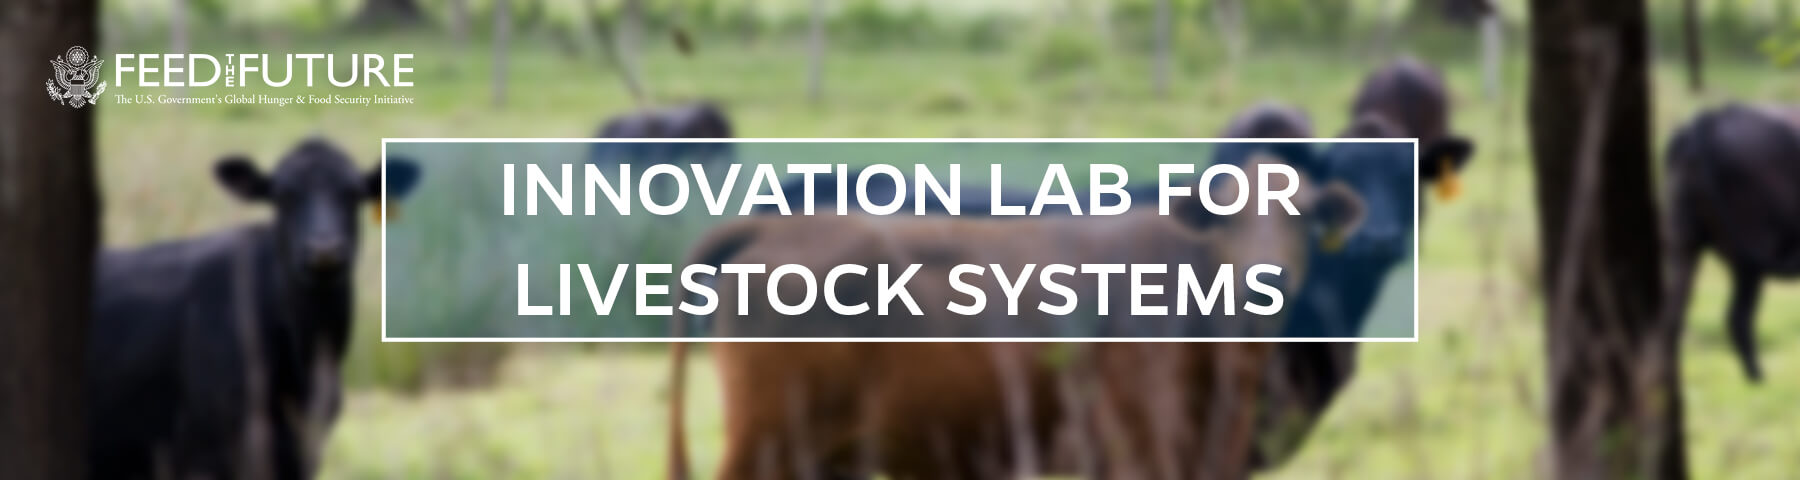 Feed the Future Innovation Lab for Livestock Systems